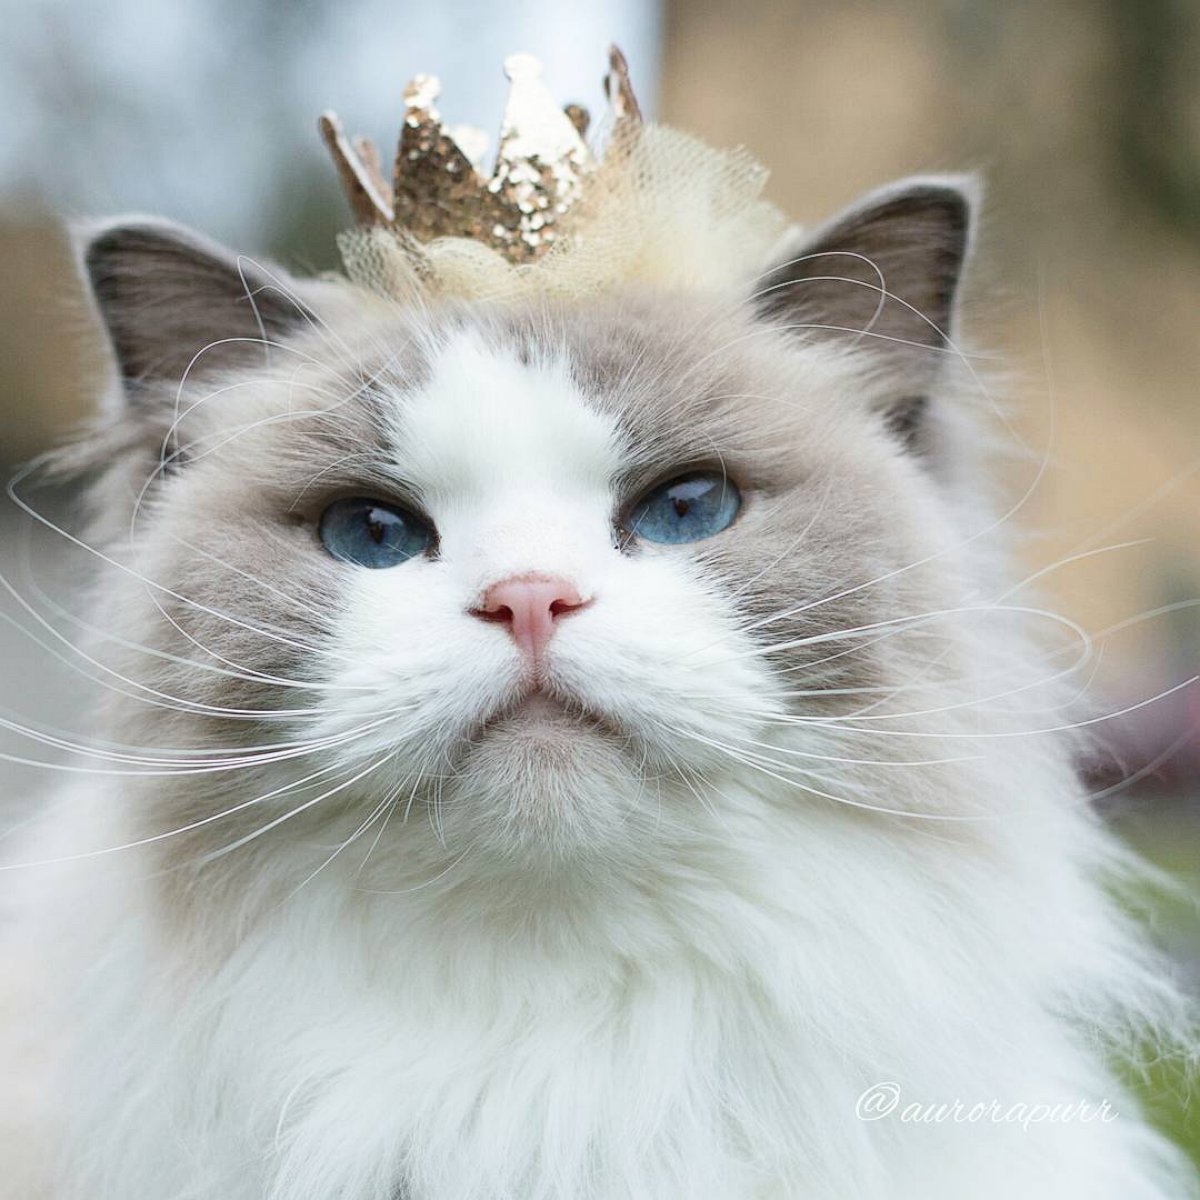 PHOTO: Meet Aurora, the most regal princess kitty in all the land.